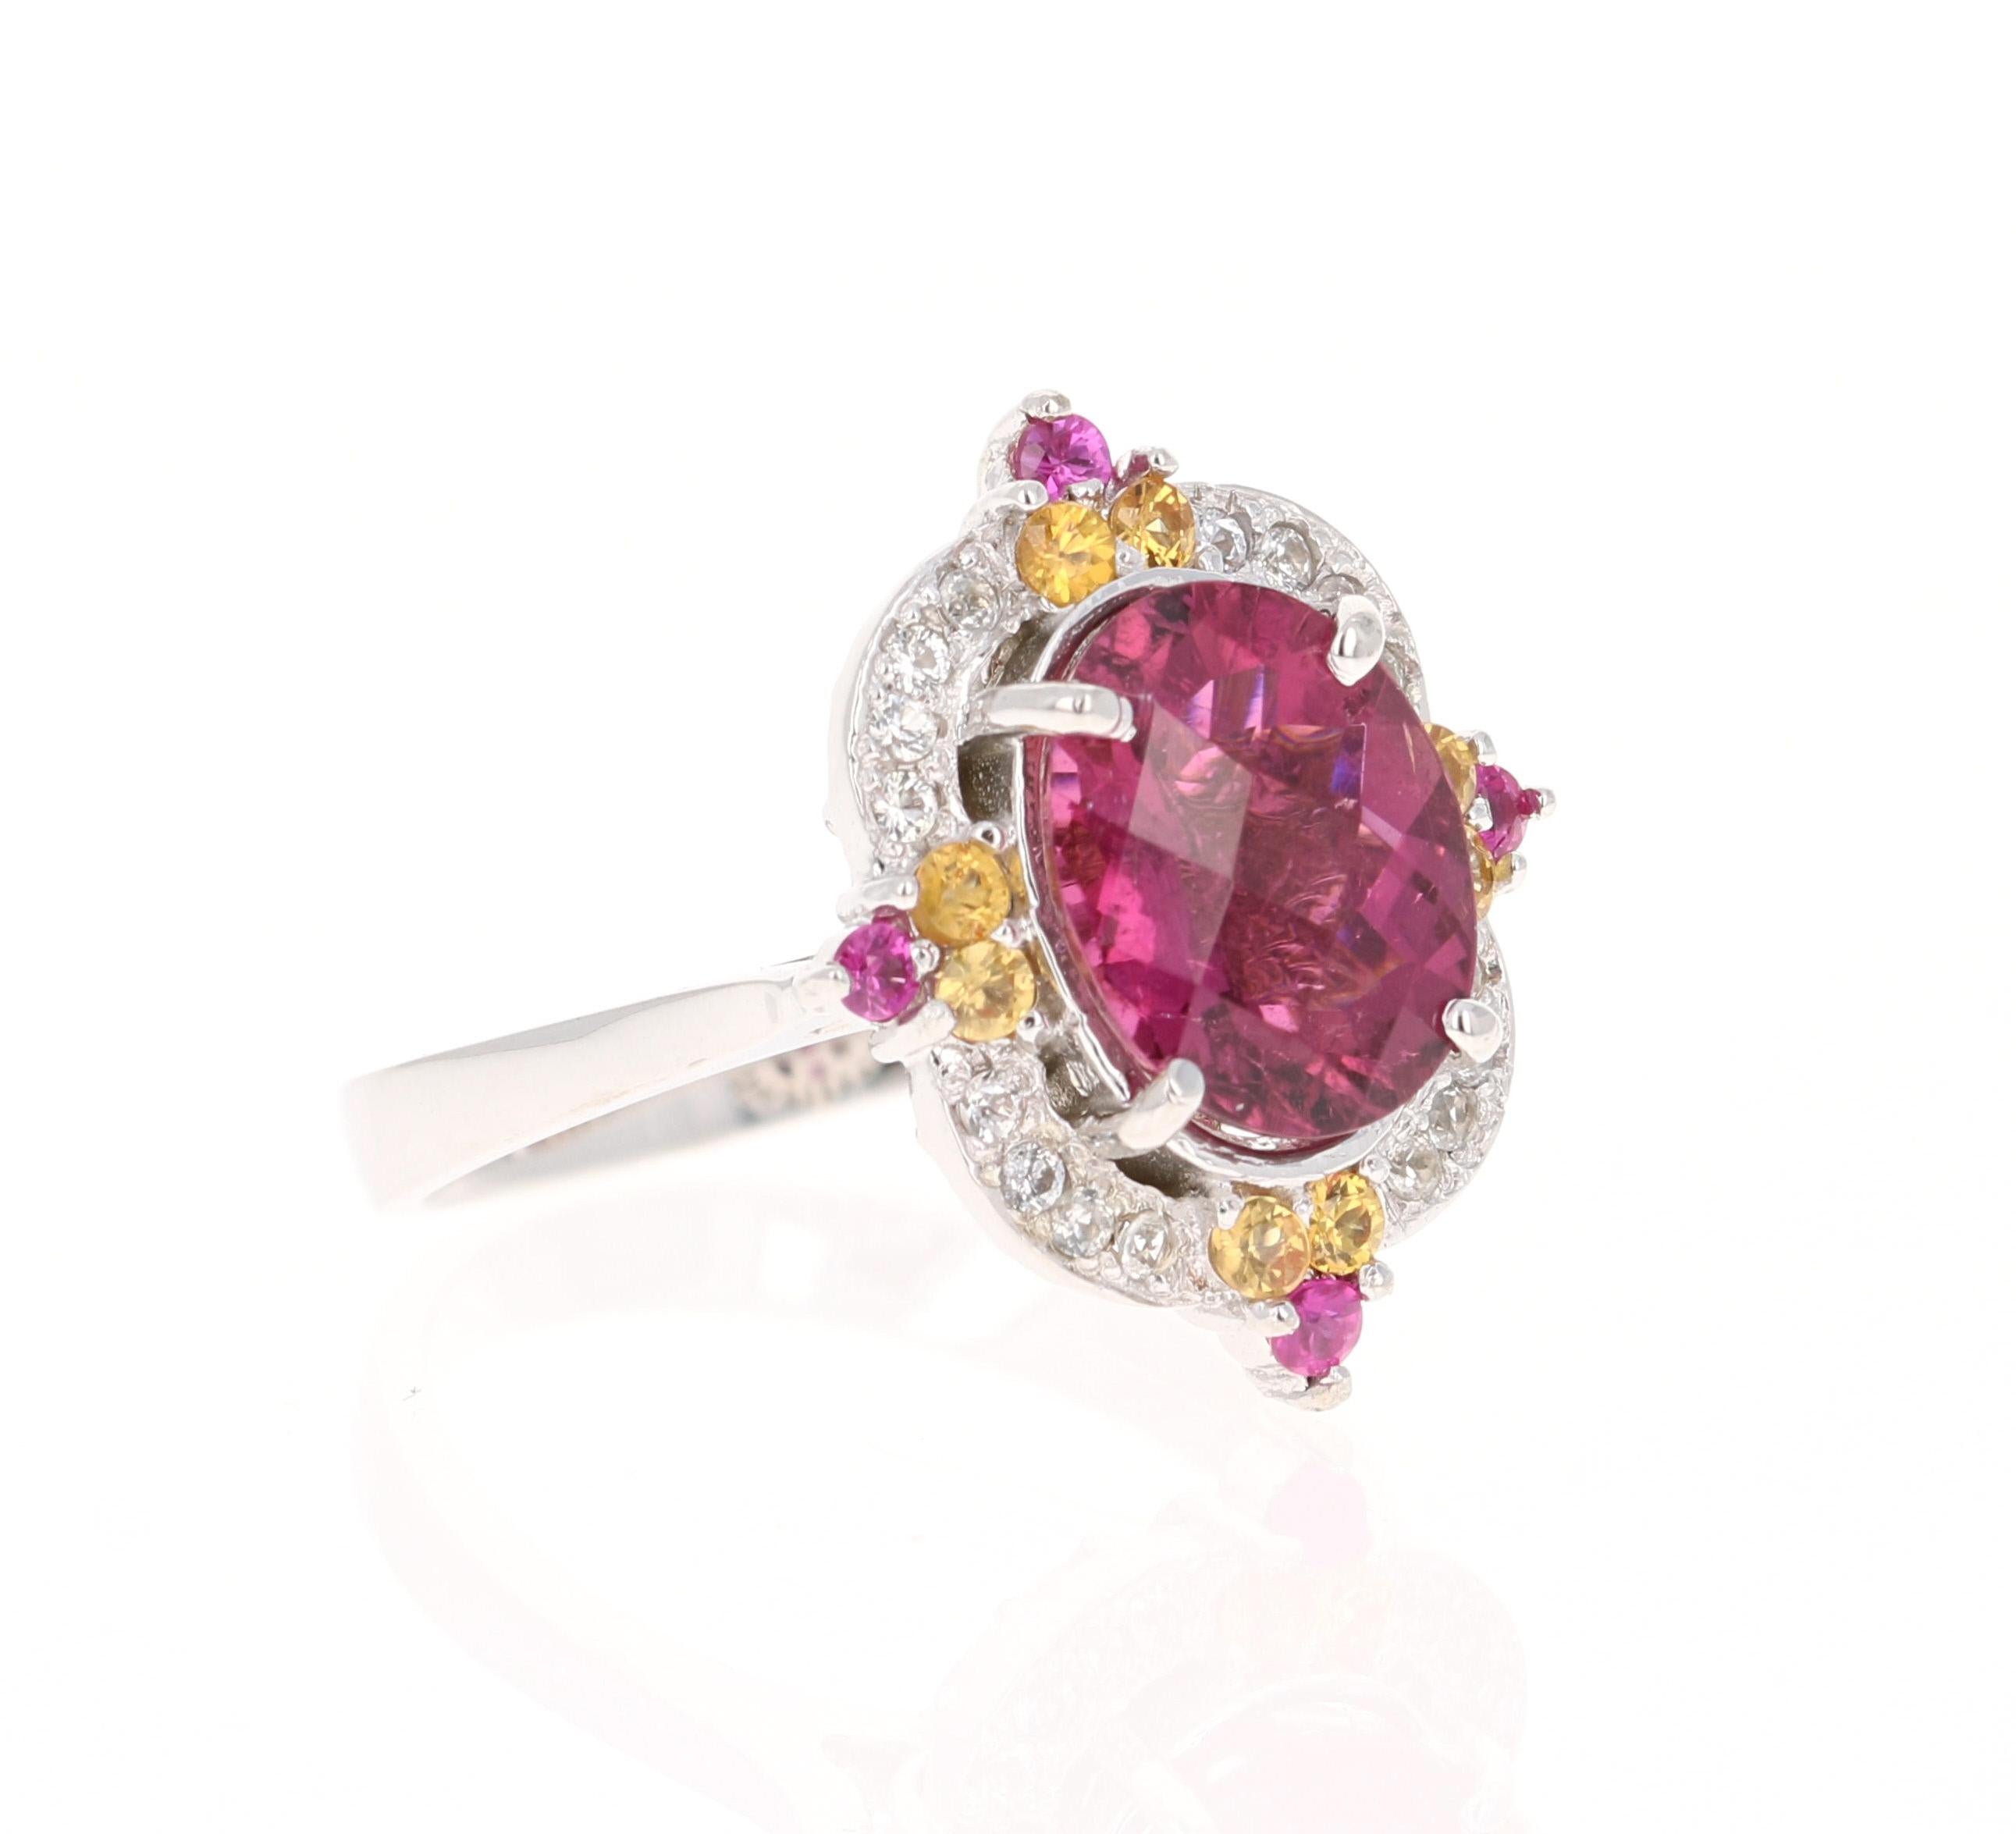 3.23 Carat Tourmaline Sapphire White Gold Cocktail Ring

This ring has a 2.68 carat Tourmaline that is set in the center of the ring and is surrounded by 12 Yellow and Pink Sapphires that weigh 0.37 carats and 16 White Sapphires that weigh 0.18